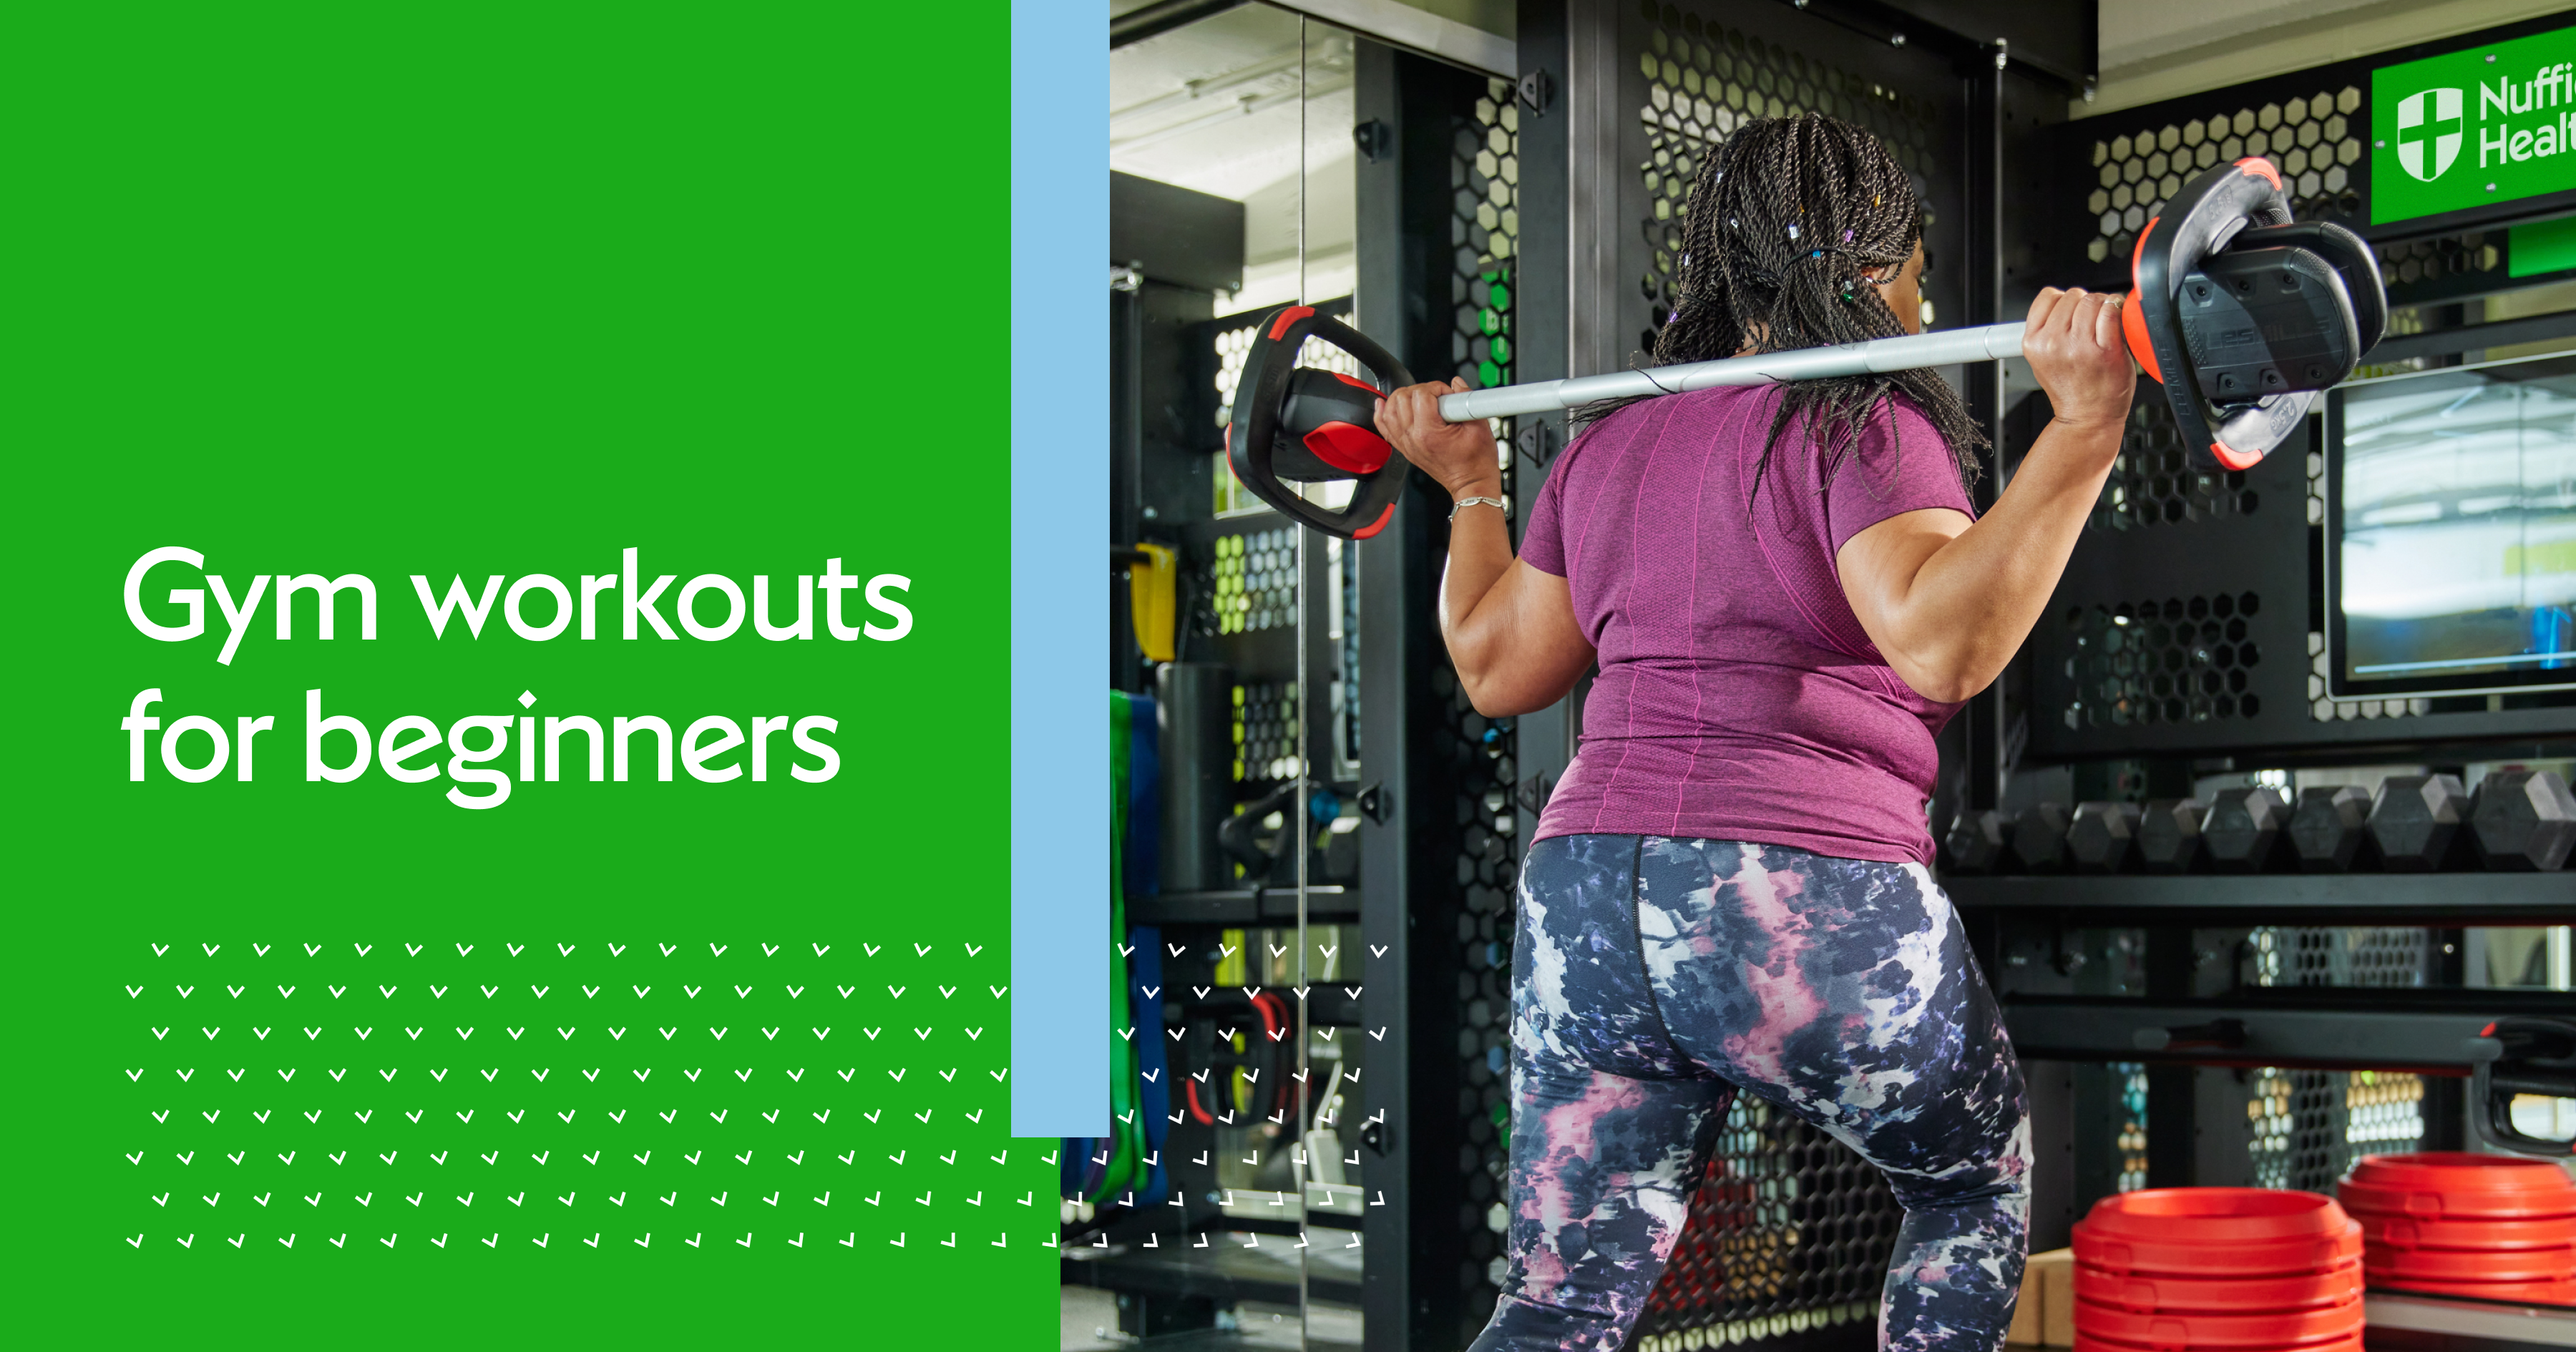 Gym workouts for beginners | Nuffield Health